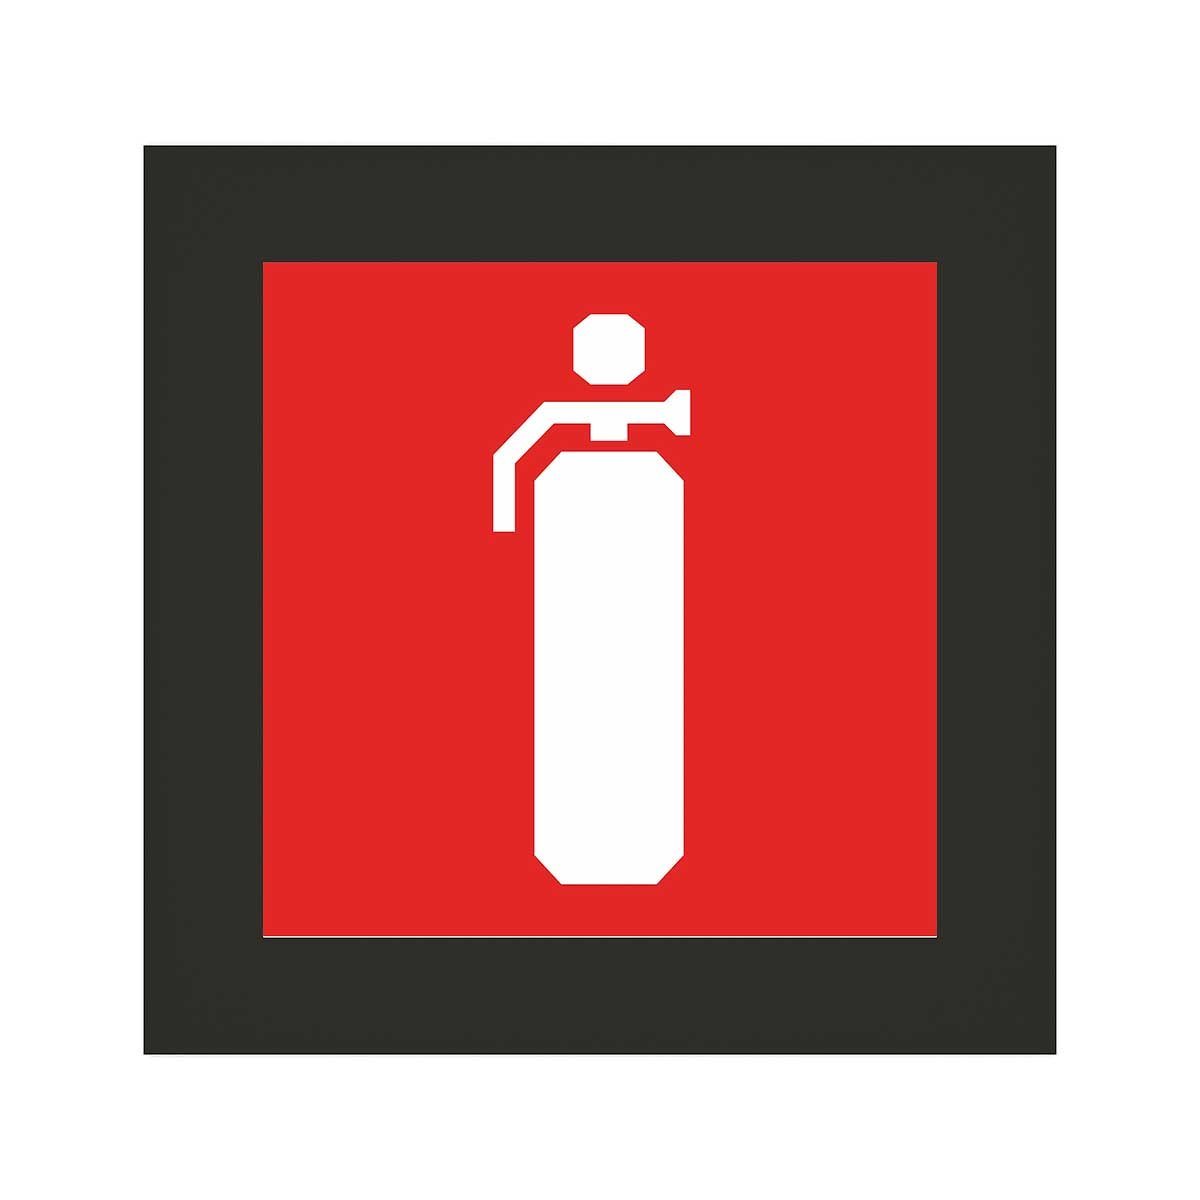 Acrylic Fire Extinguisher Safety Sign Information signs black base Bsign